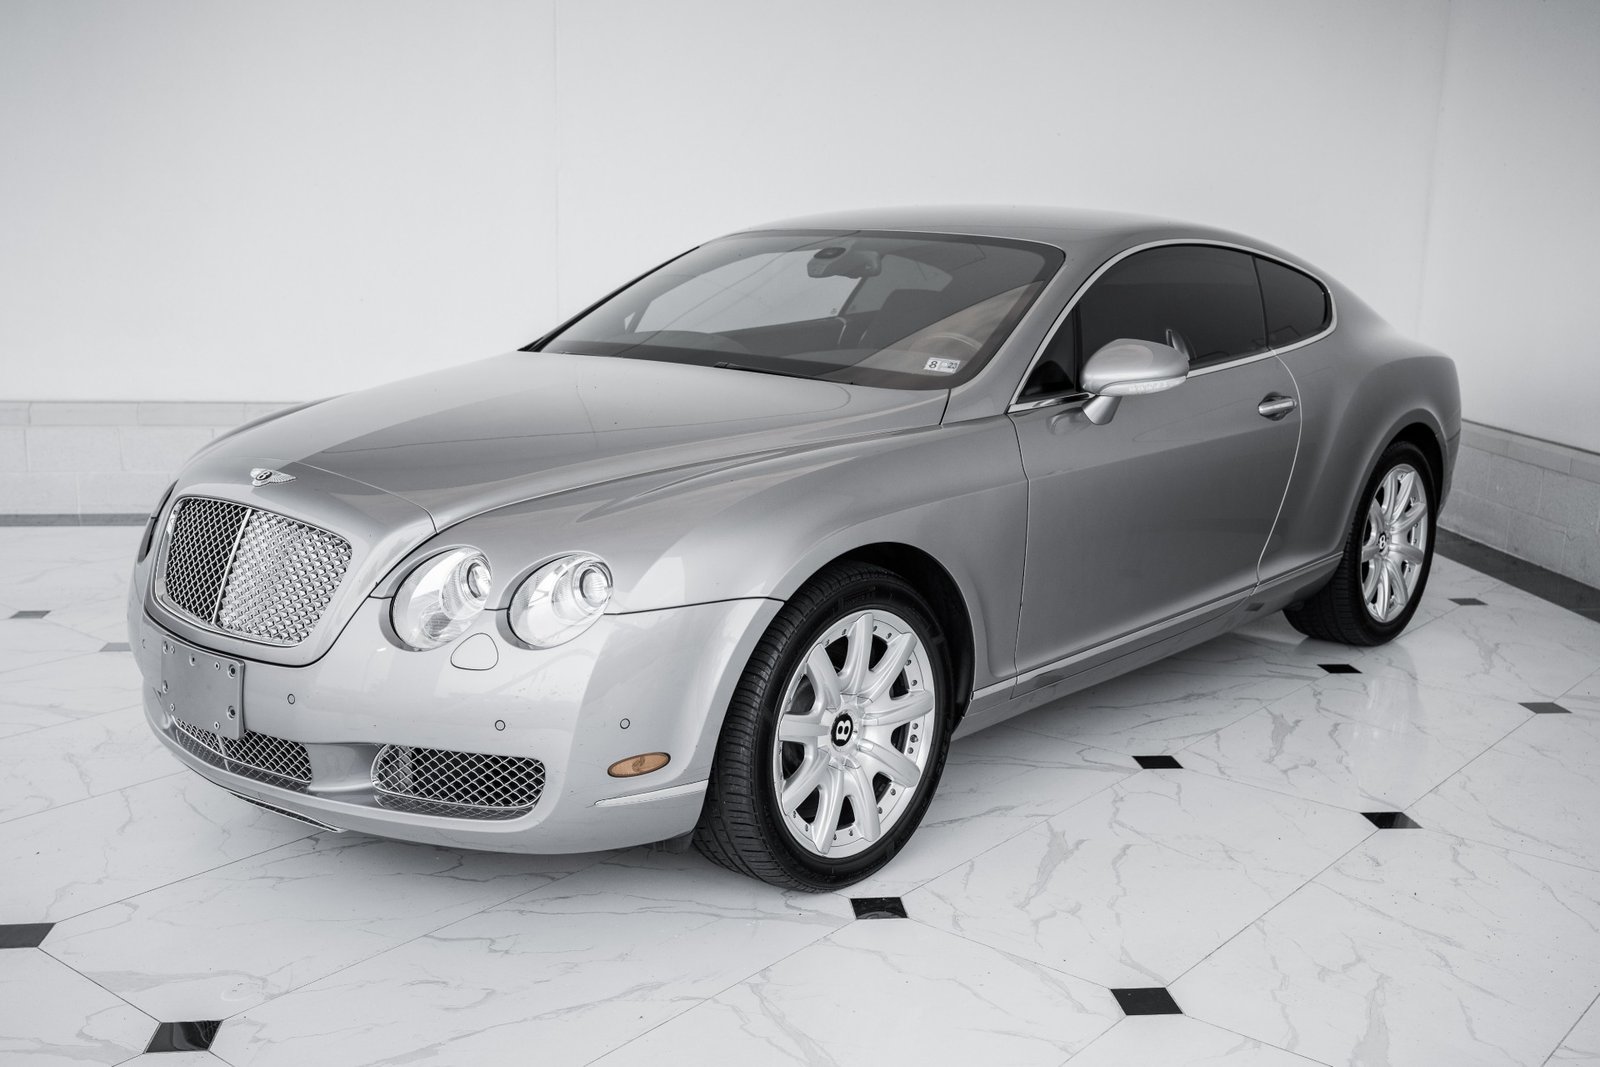 Used 2006 BENTLEY CONTINENTAL GT 2DR COUPE (15)